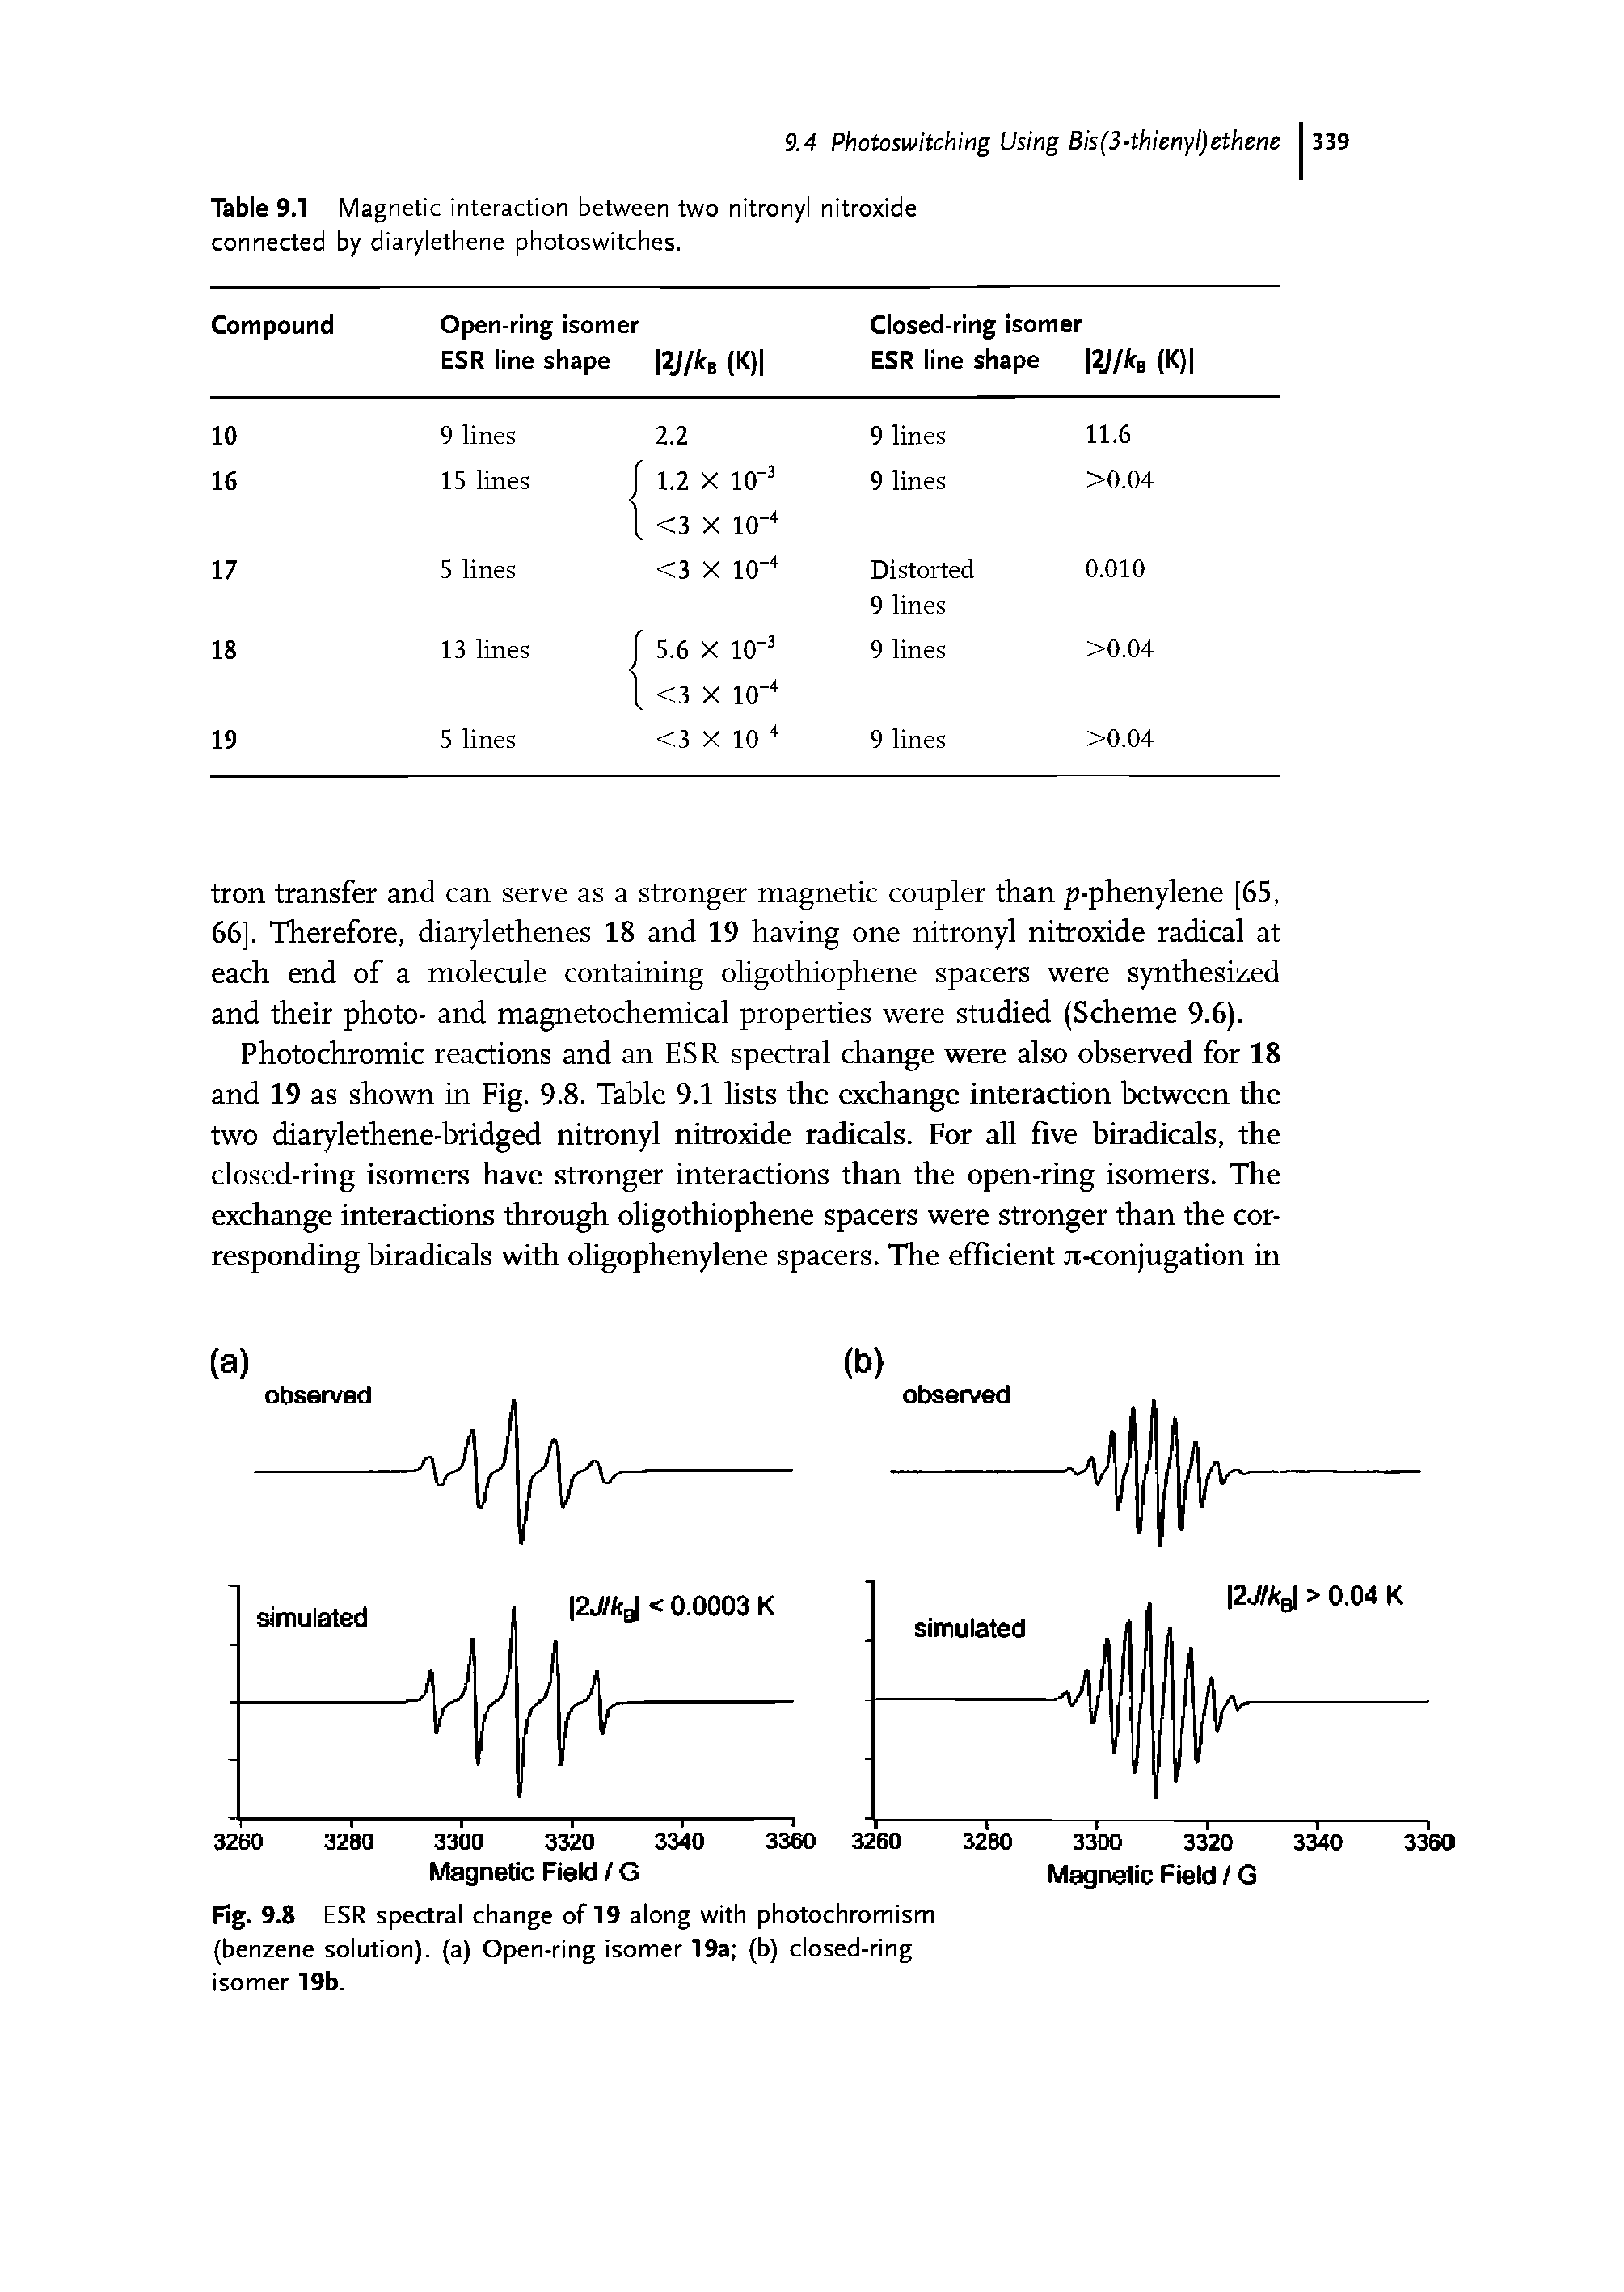 Table 9.1 Magnetic interaction between two nitronyl nitroxide connected by diarylethene photoswitches.